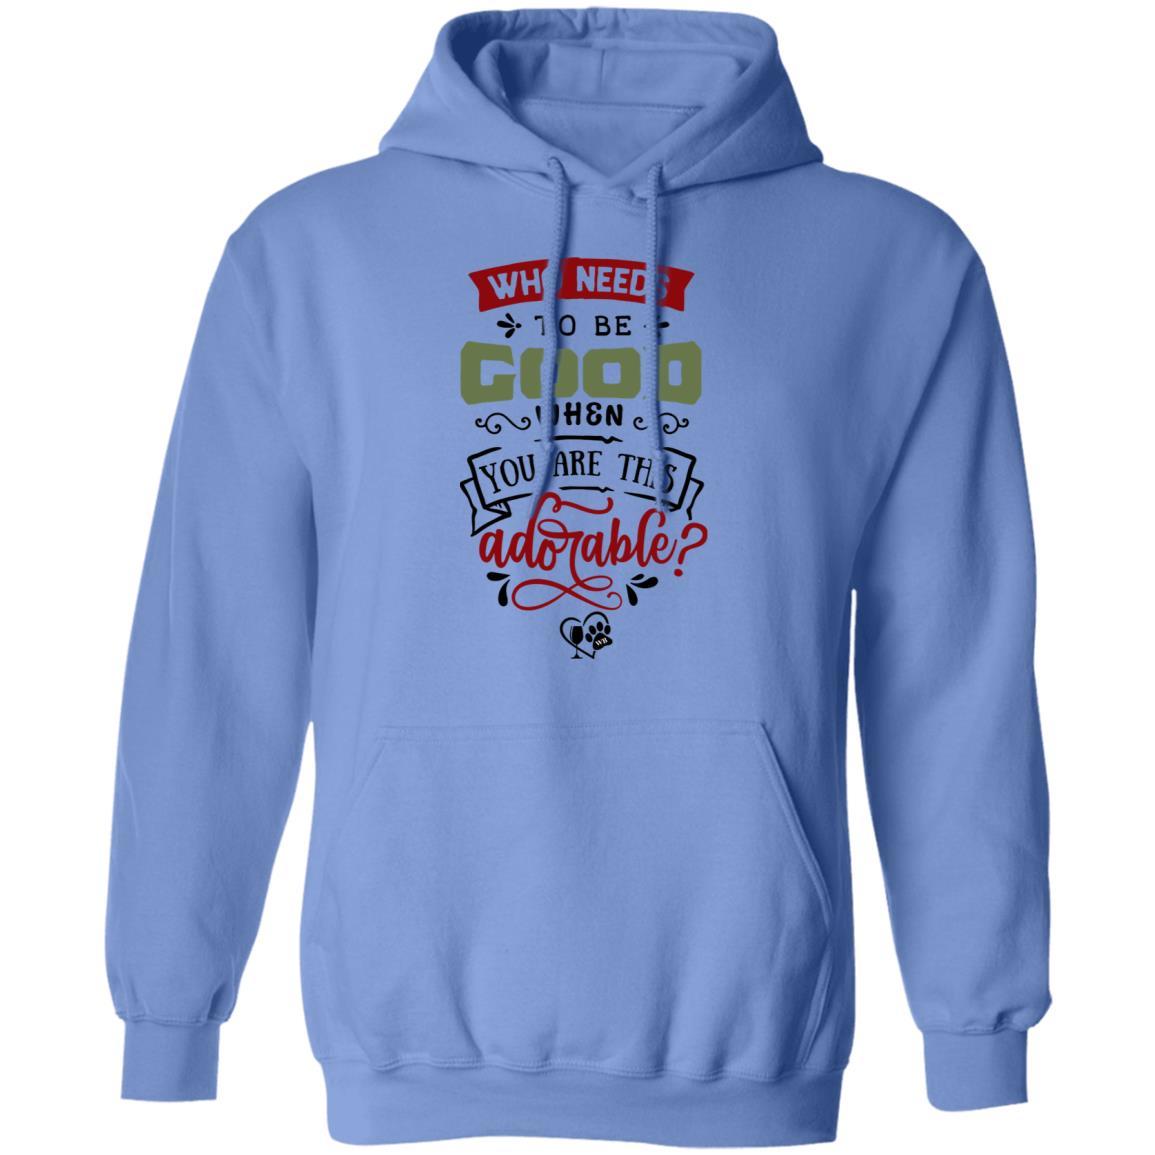 Sweatshirts Carolina Blue / S WineyBitches.Co "Who Needs To Be Good When You Are This Adorable" Pullover Hoodie 8 oz. WineyBitchesCo